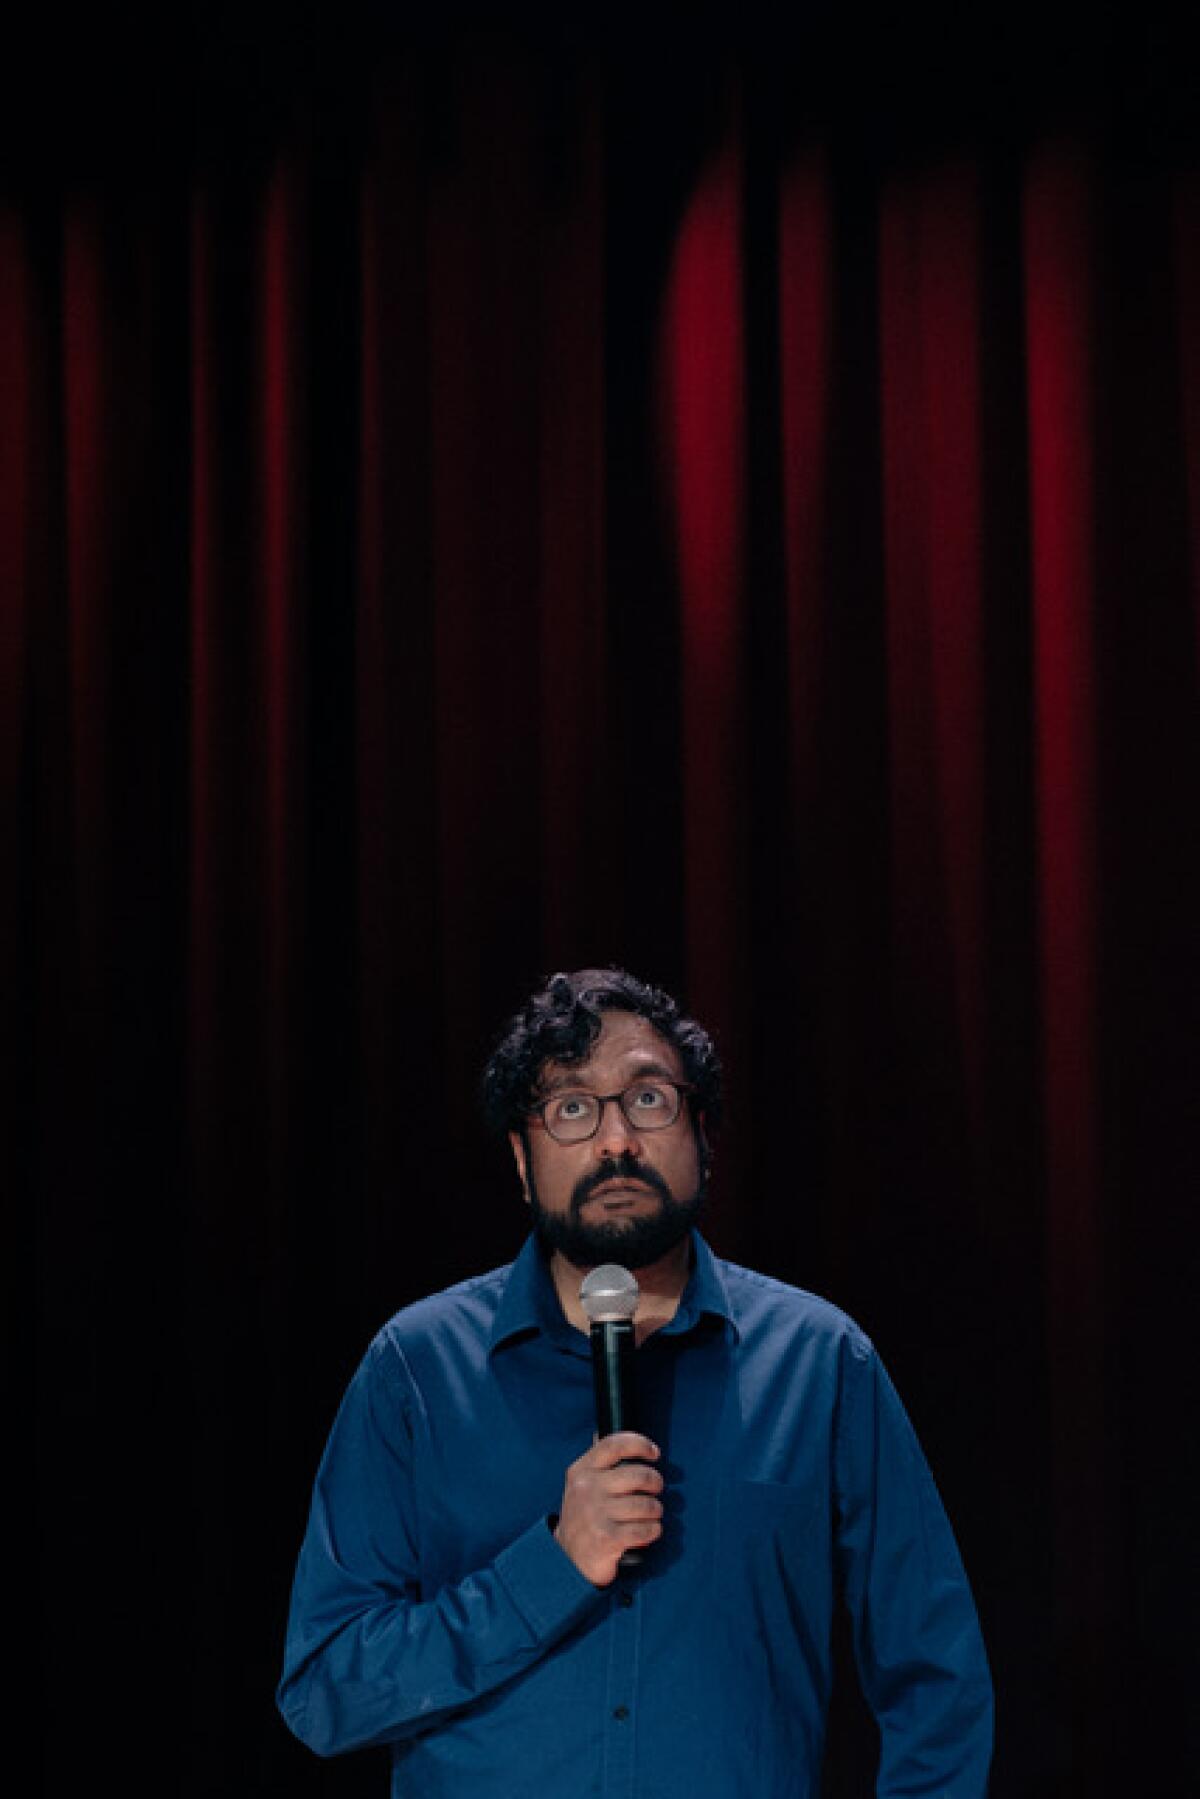 Hari Kondabolu holding a microphone in front of a red curtain